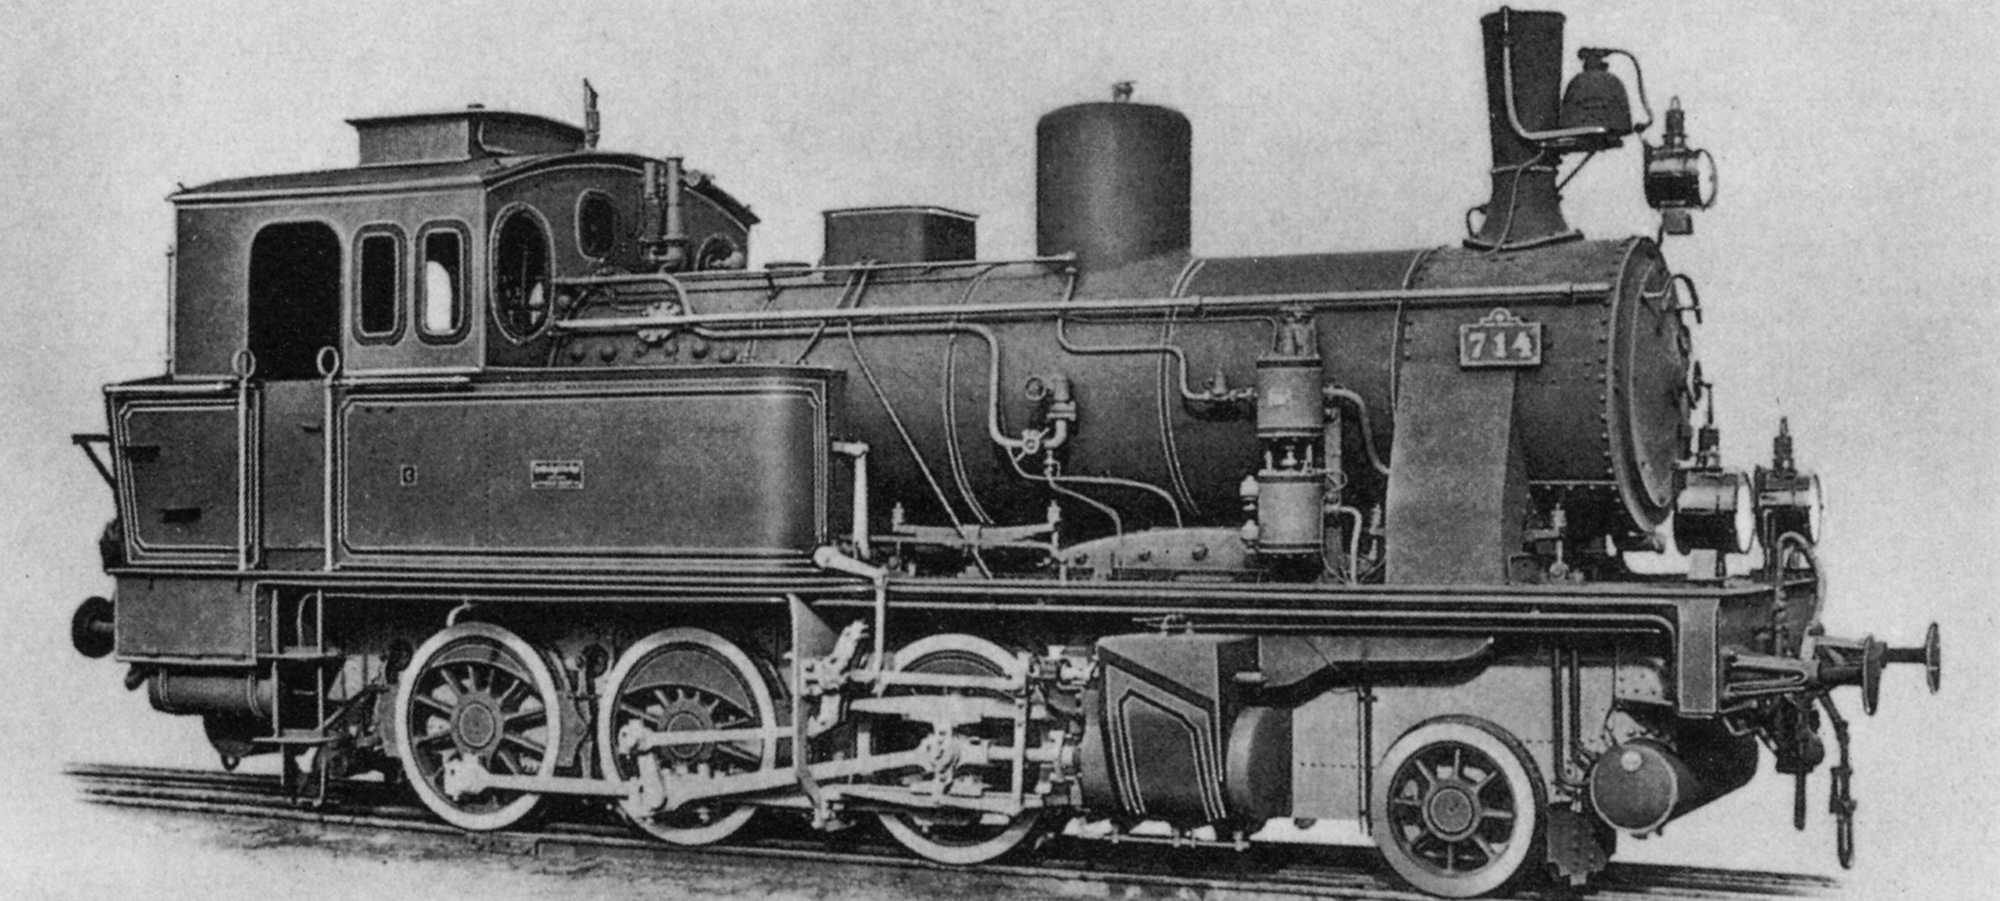 No. 714 from a series of 30 machines from 1907-1914